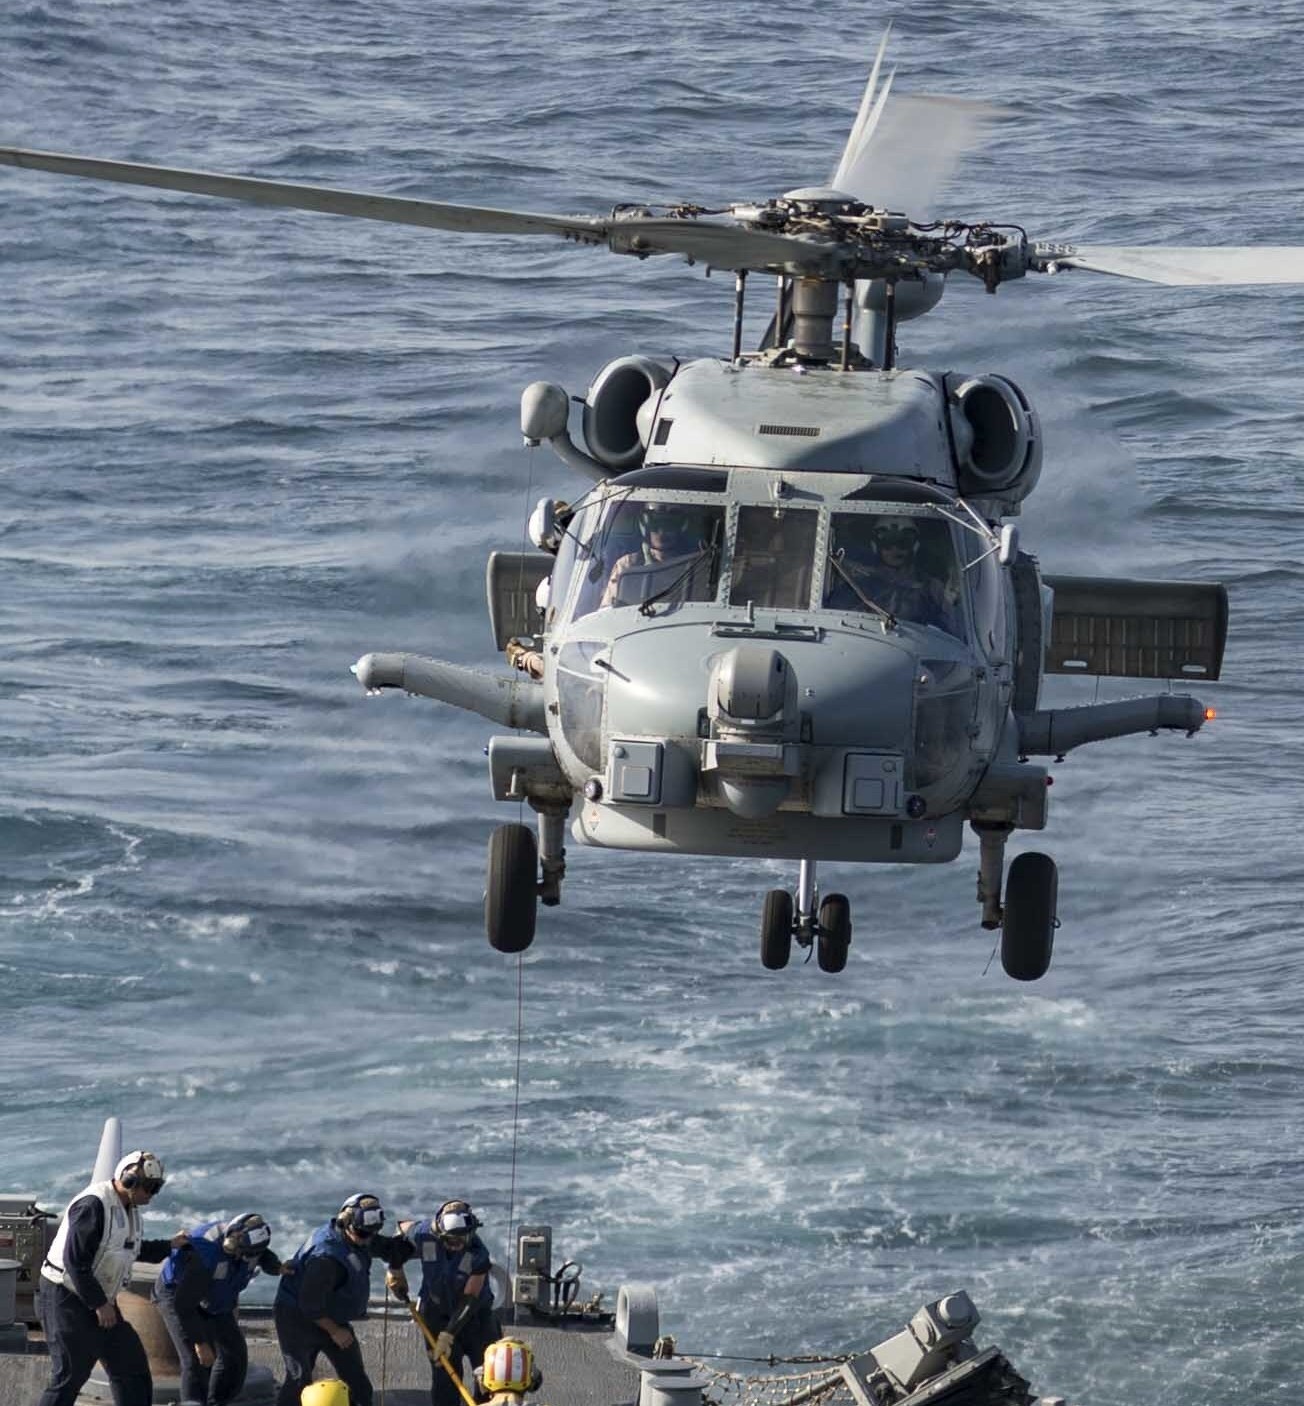 hsm-74 swamp foxes helicopter maritime strike squadron mh-60r seahawk ddg-55 uss stout 79